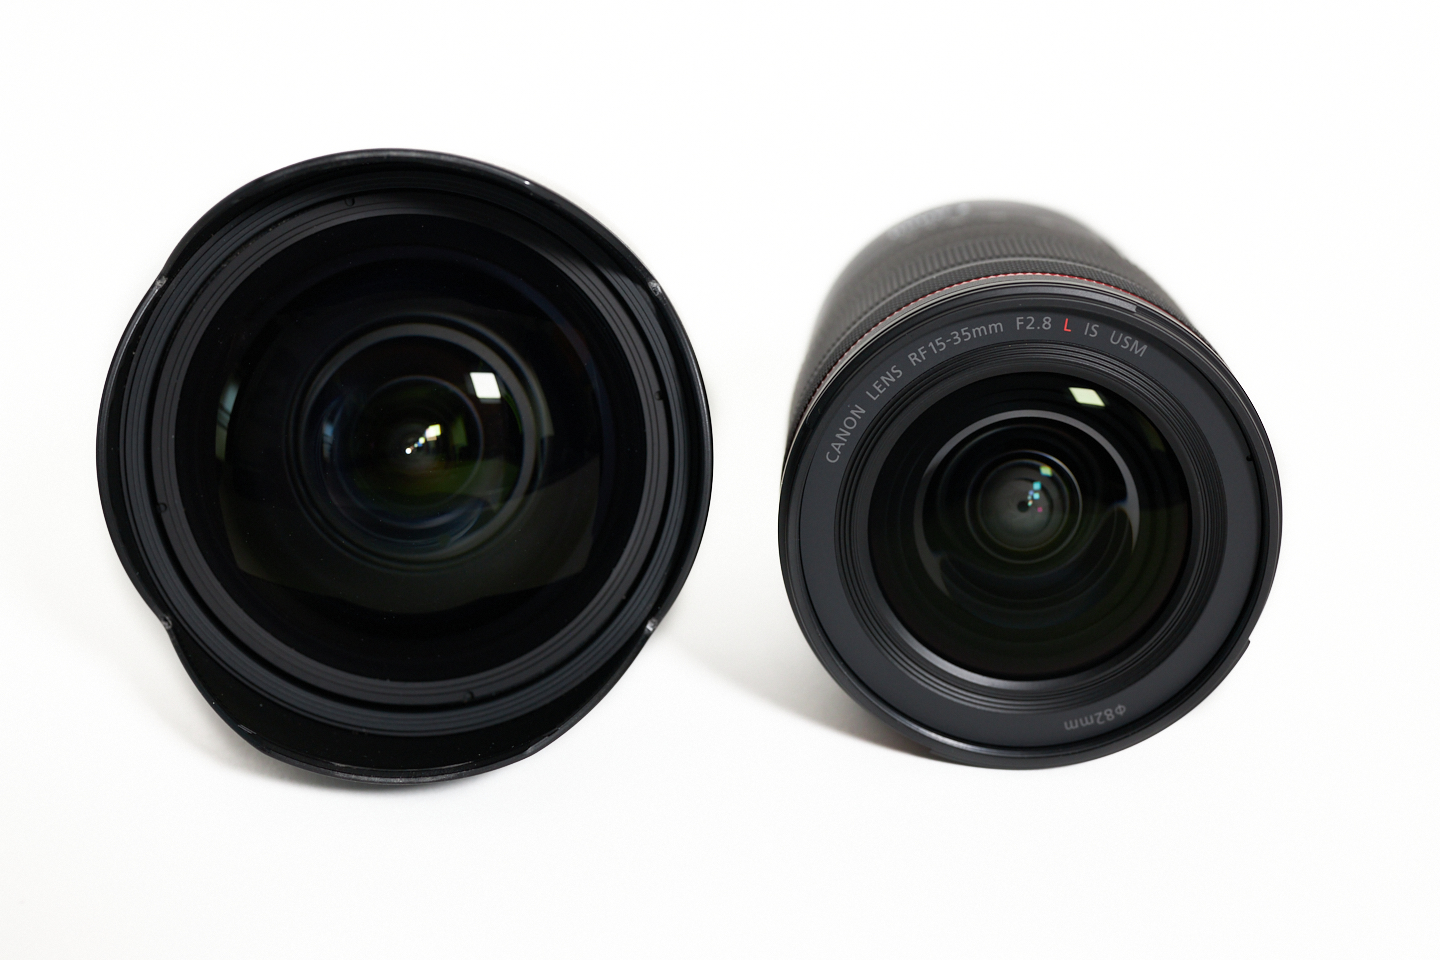 EF 11-24mm (left) and RF 15-35mm (right)